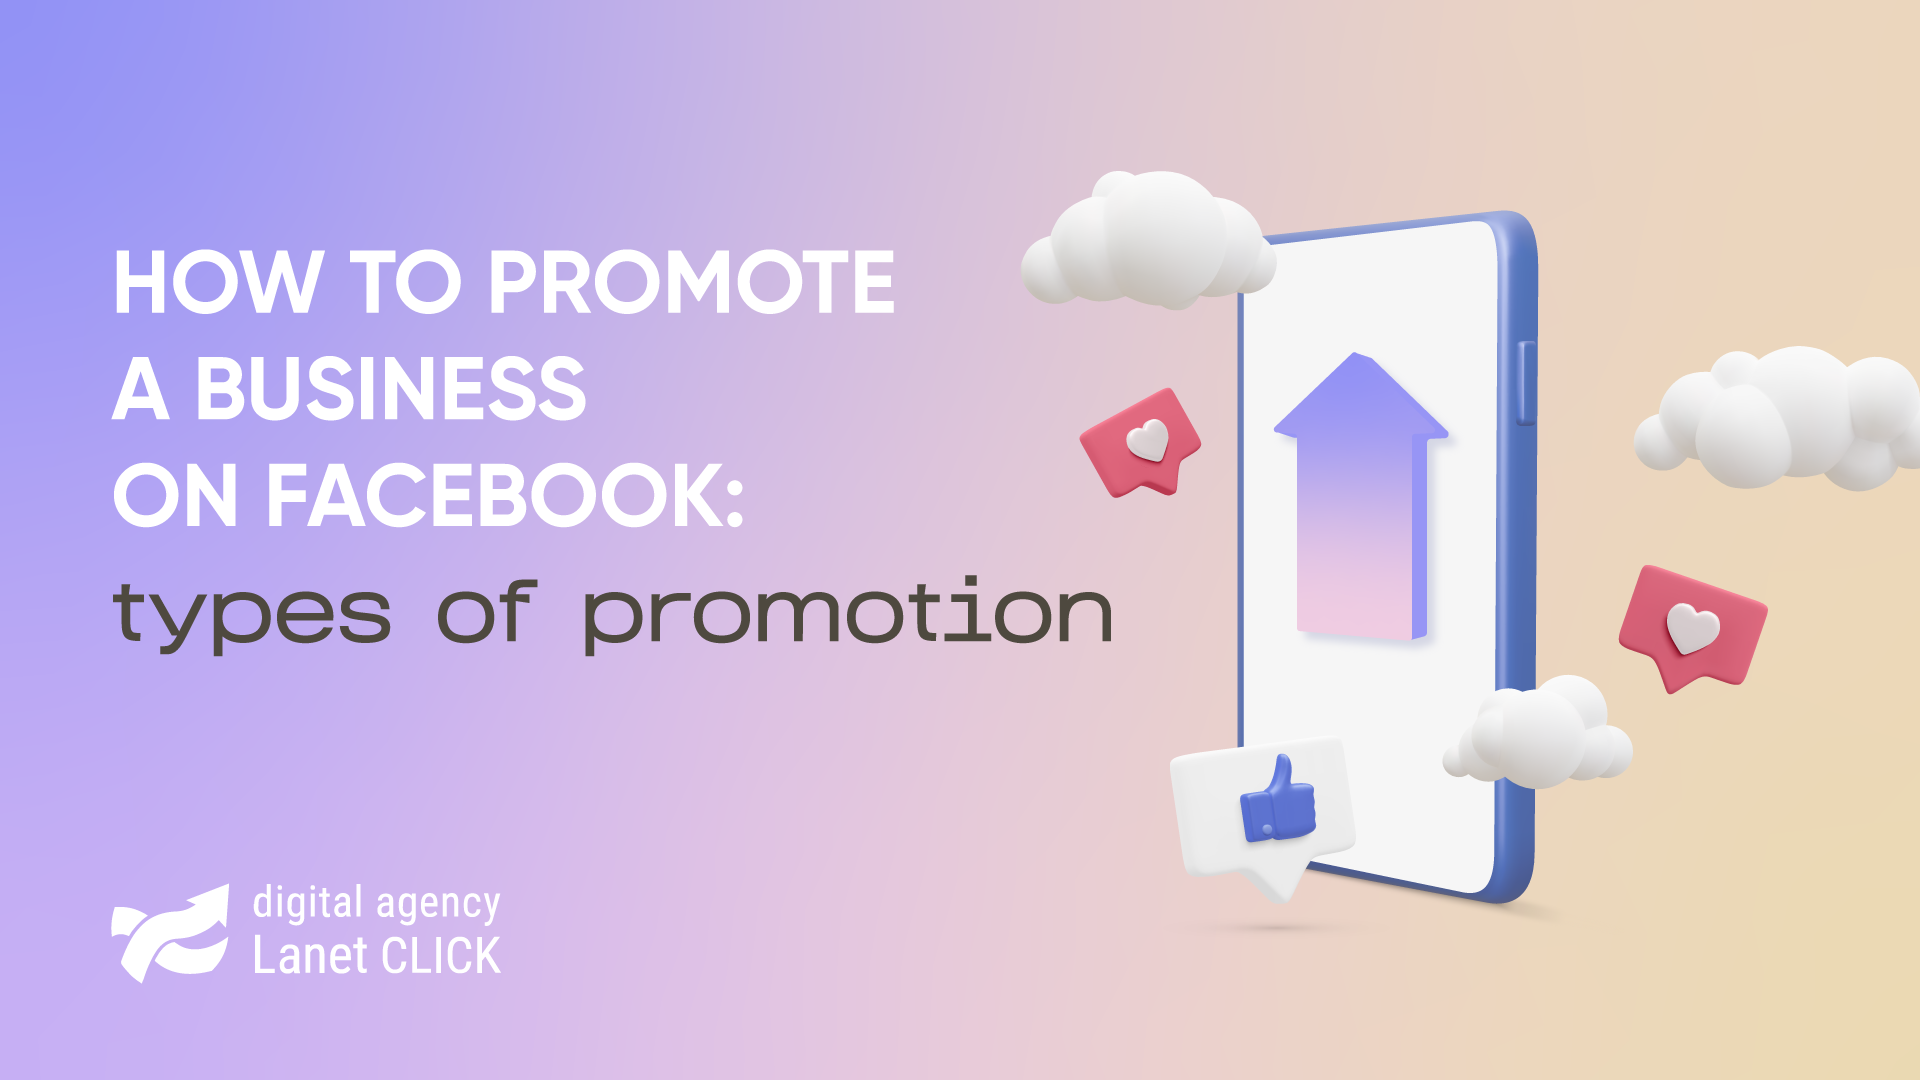 How to promote a business on Facebook: types of promotion on Facebook